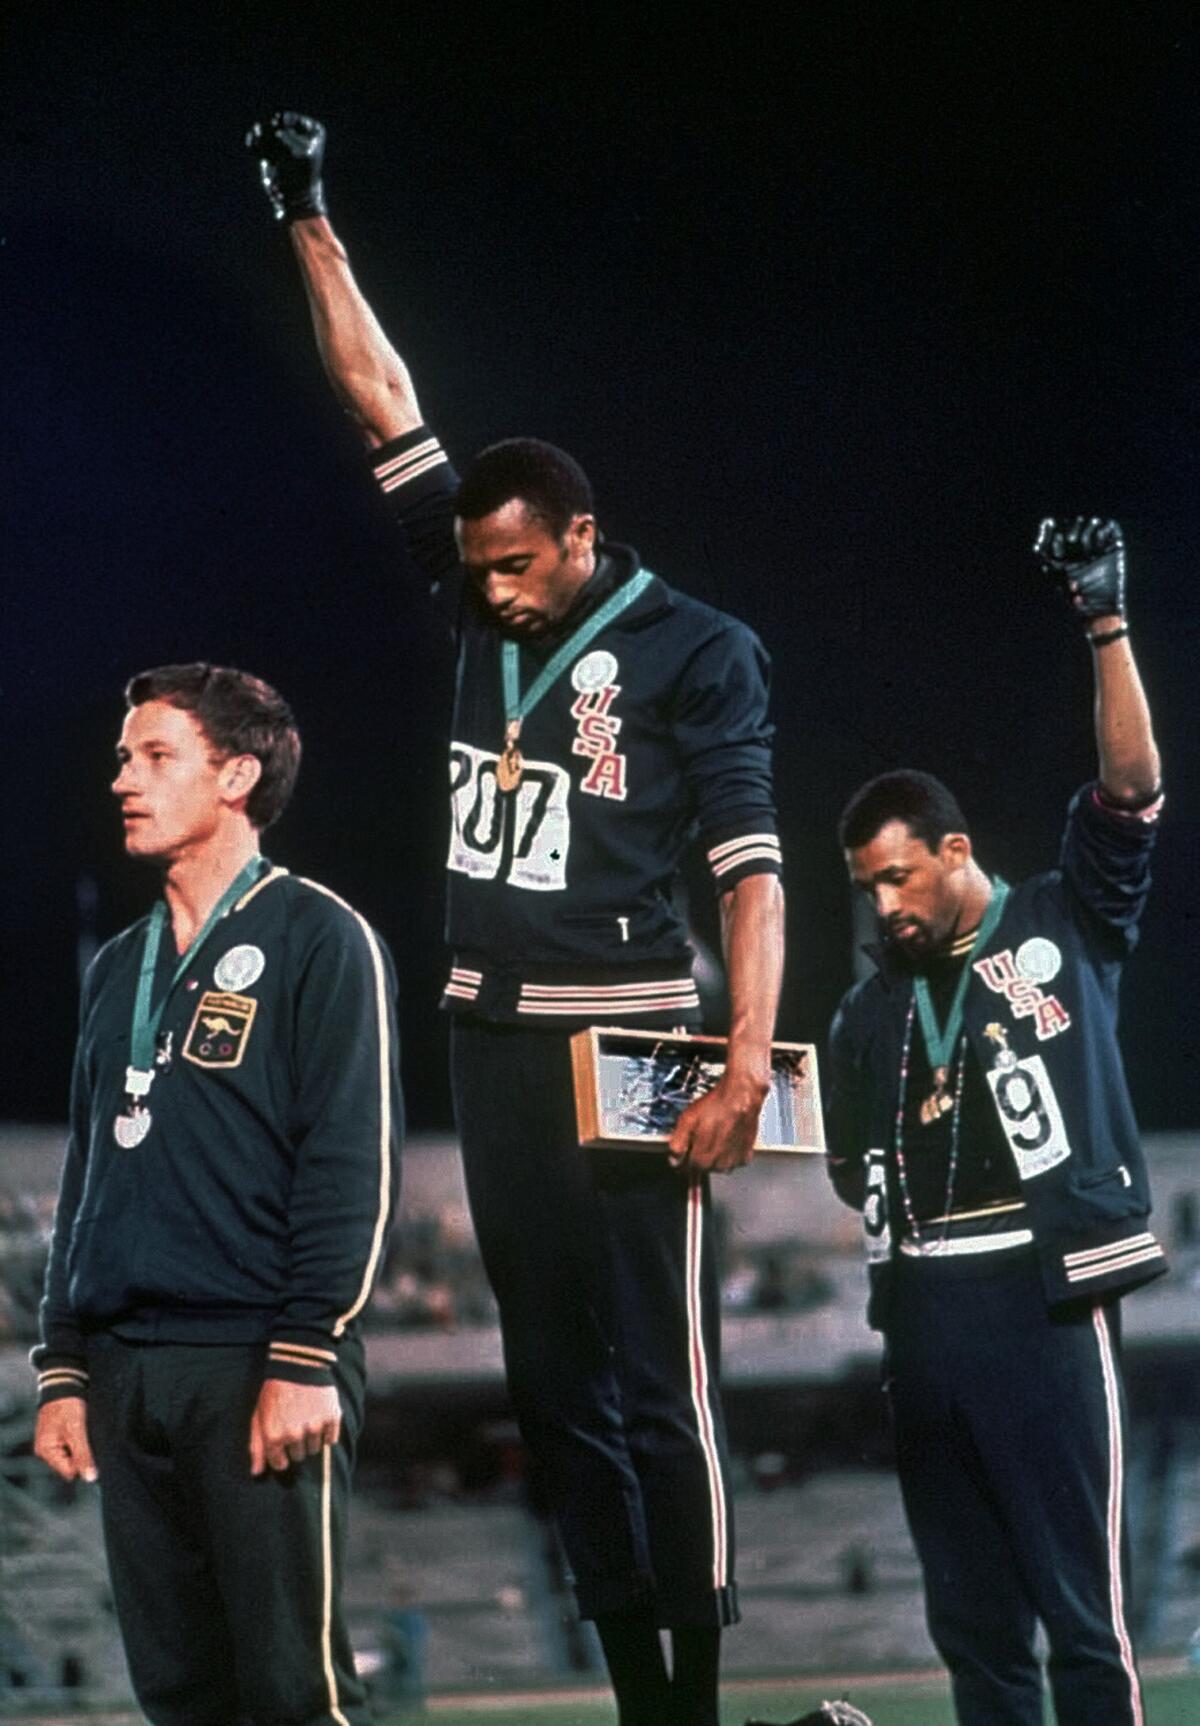 FILE - In this Oct. 16, 1968, file photo, extending gloved hands skyward in protest, U.S. athletes Tommie Smith, center, and John Carlos stare downward during the national anthem after Smith received the gold and Carlos the bronze in the men's 200 meters at the Summer Olympics in Mexico City. Australian silver medalist Peter Norman is at left. In a major shift in policy, the U.S. Olympic and Paralympic Committee committed to not sanction athletes who use their platform for social demonstrations. The USOPC stance sets up the possibility for conflict and confusion at the Tokyo Games, where the IOC will be in charge. (AP Photo/File)